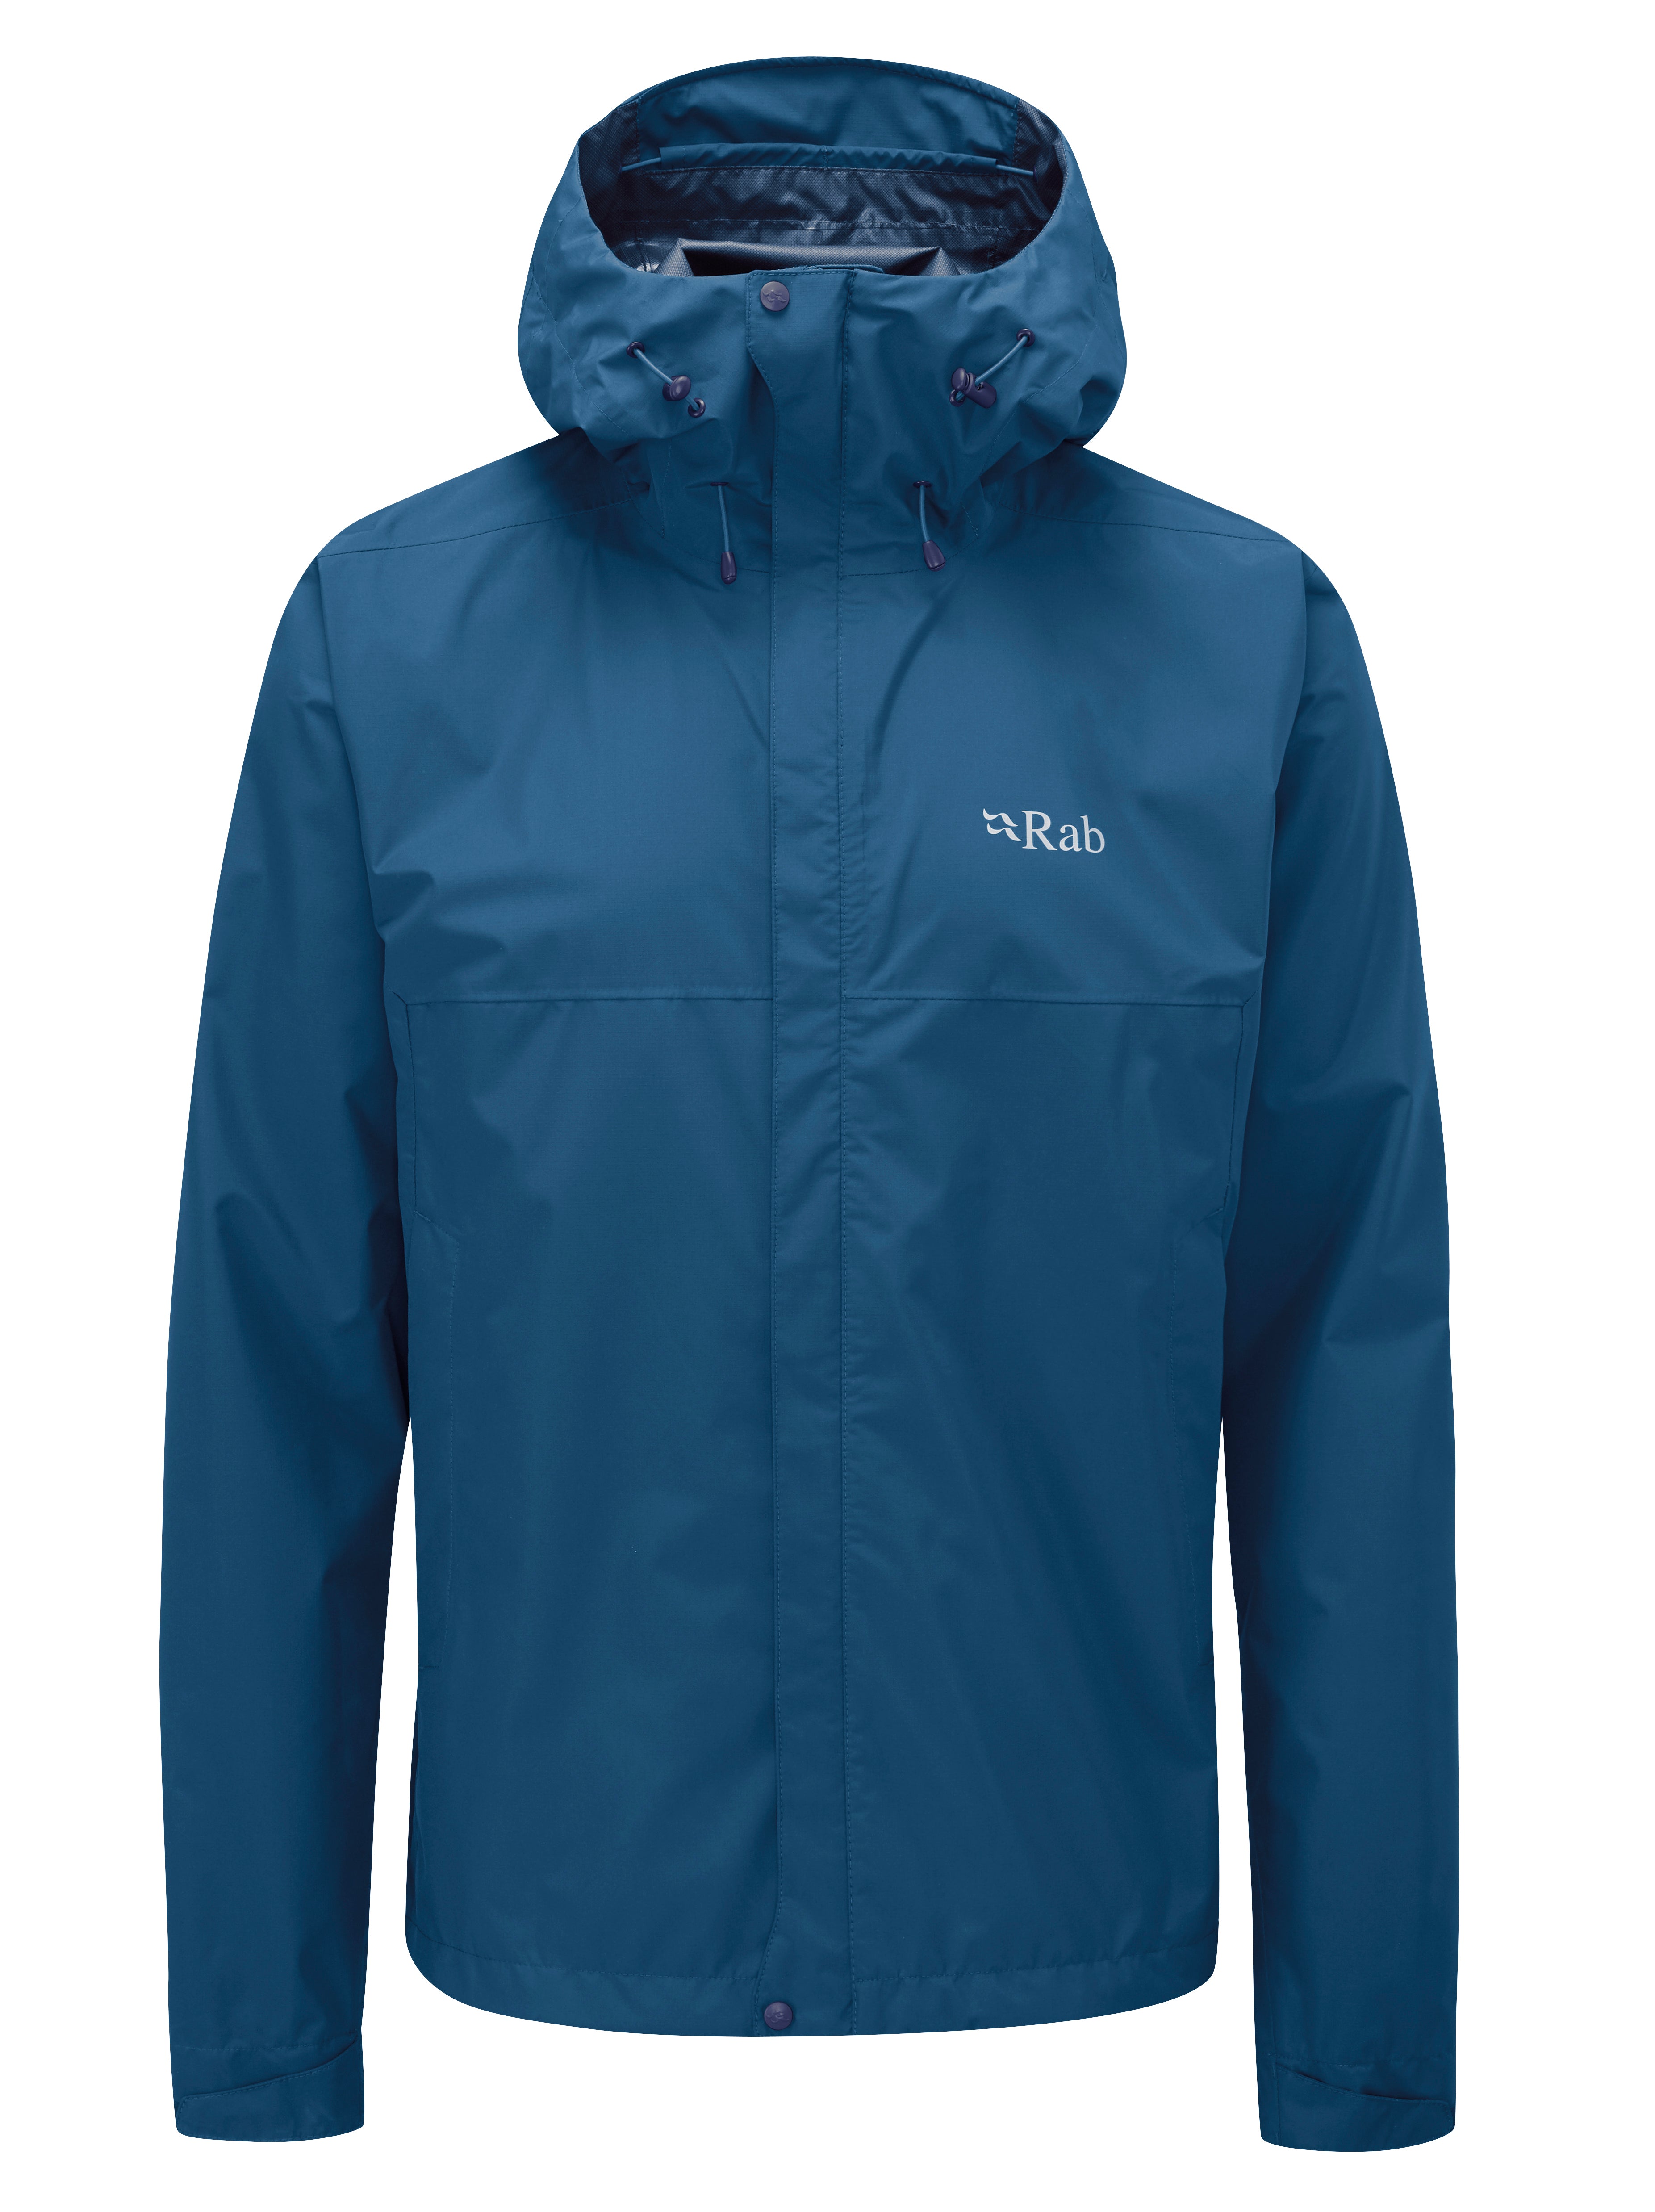 Rab Men's Downpour Eco Jacket - Outfitters Store